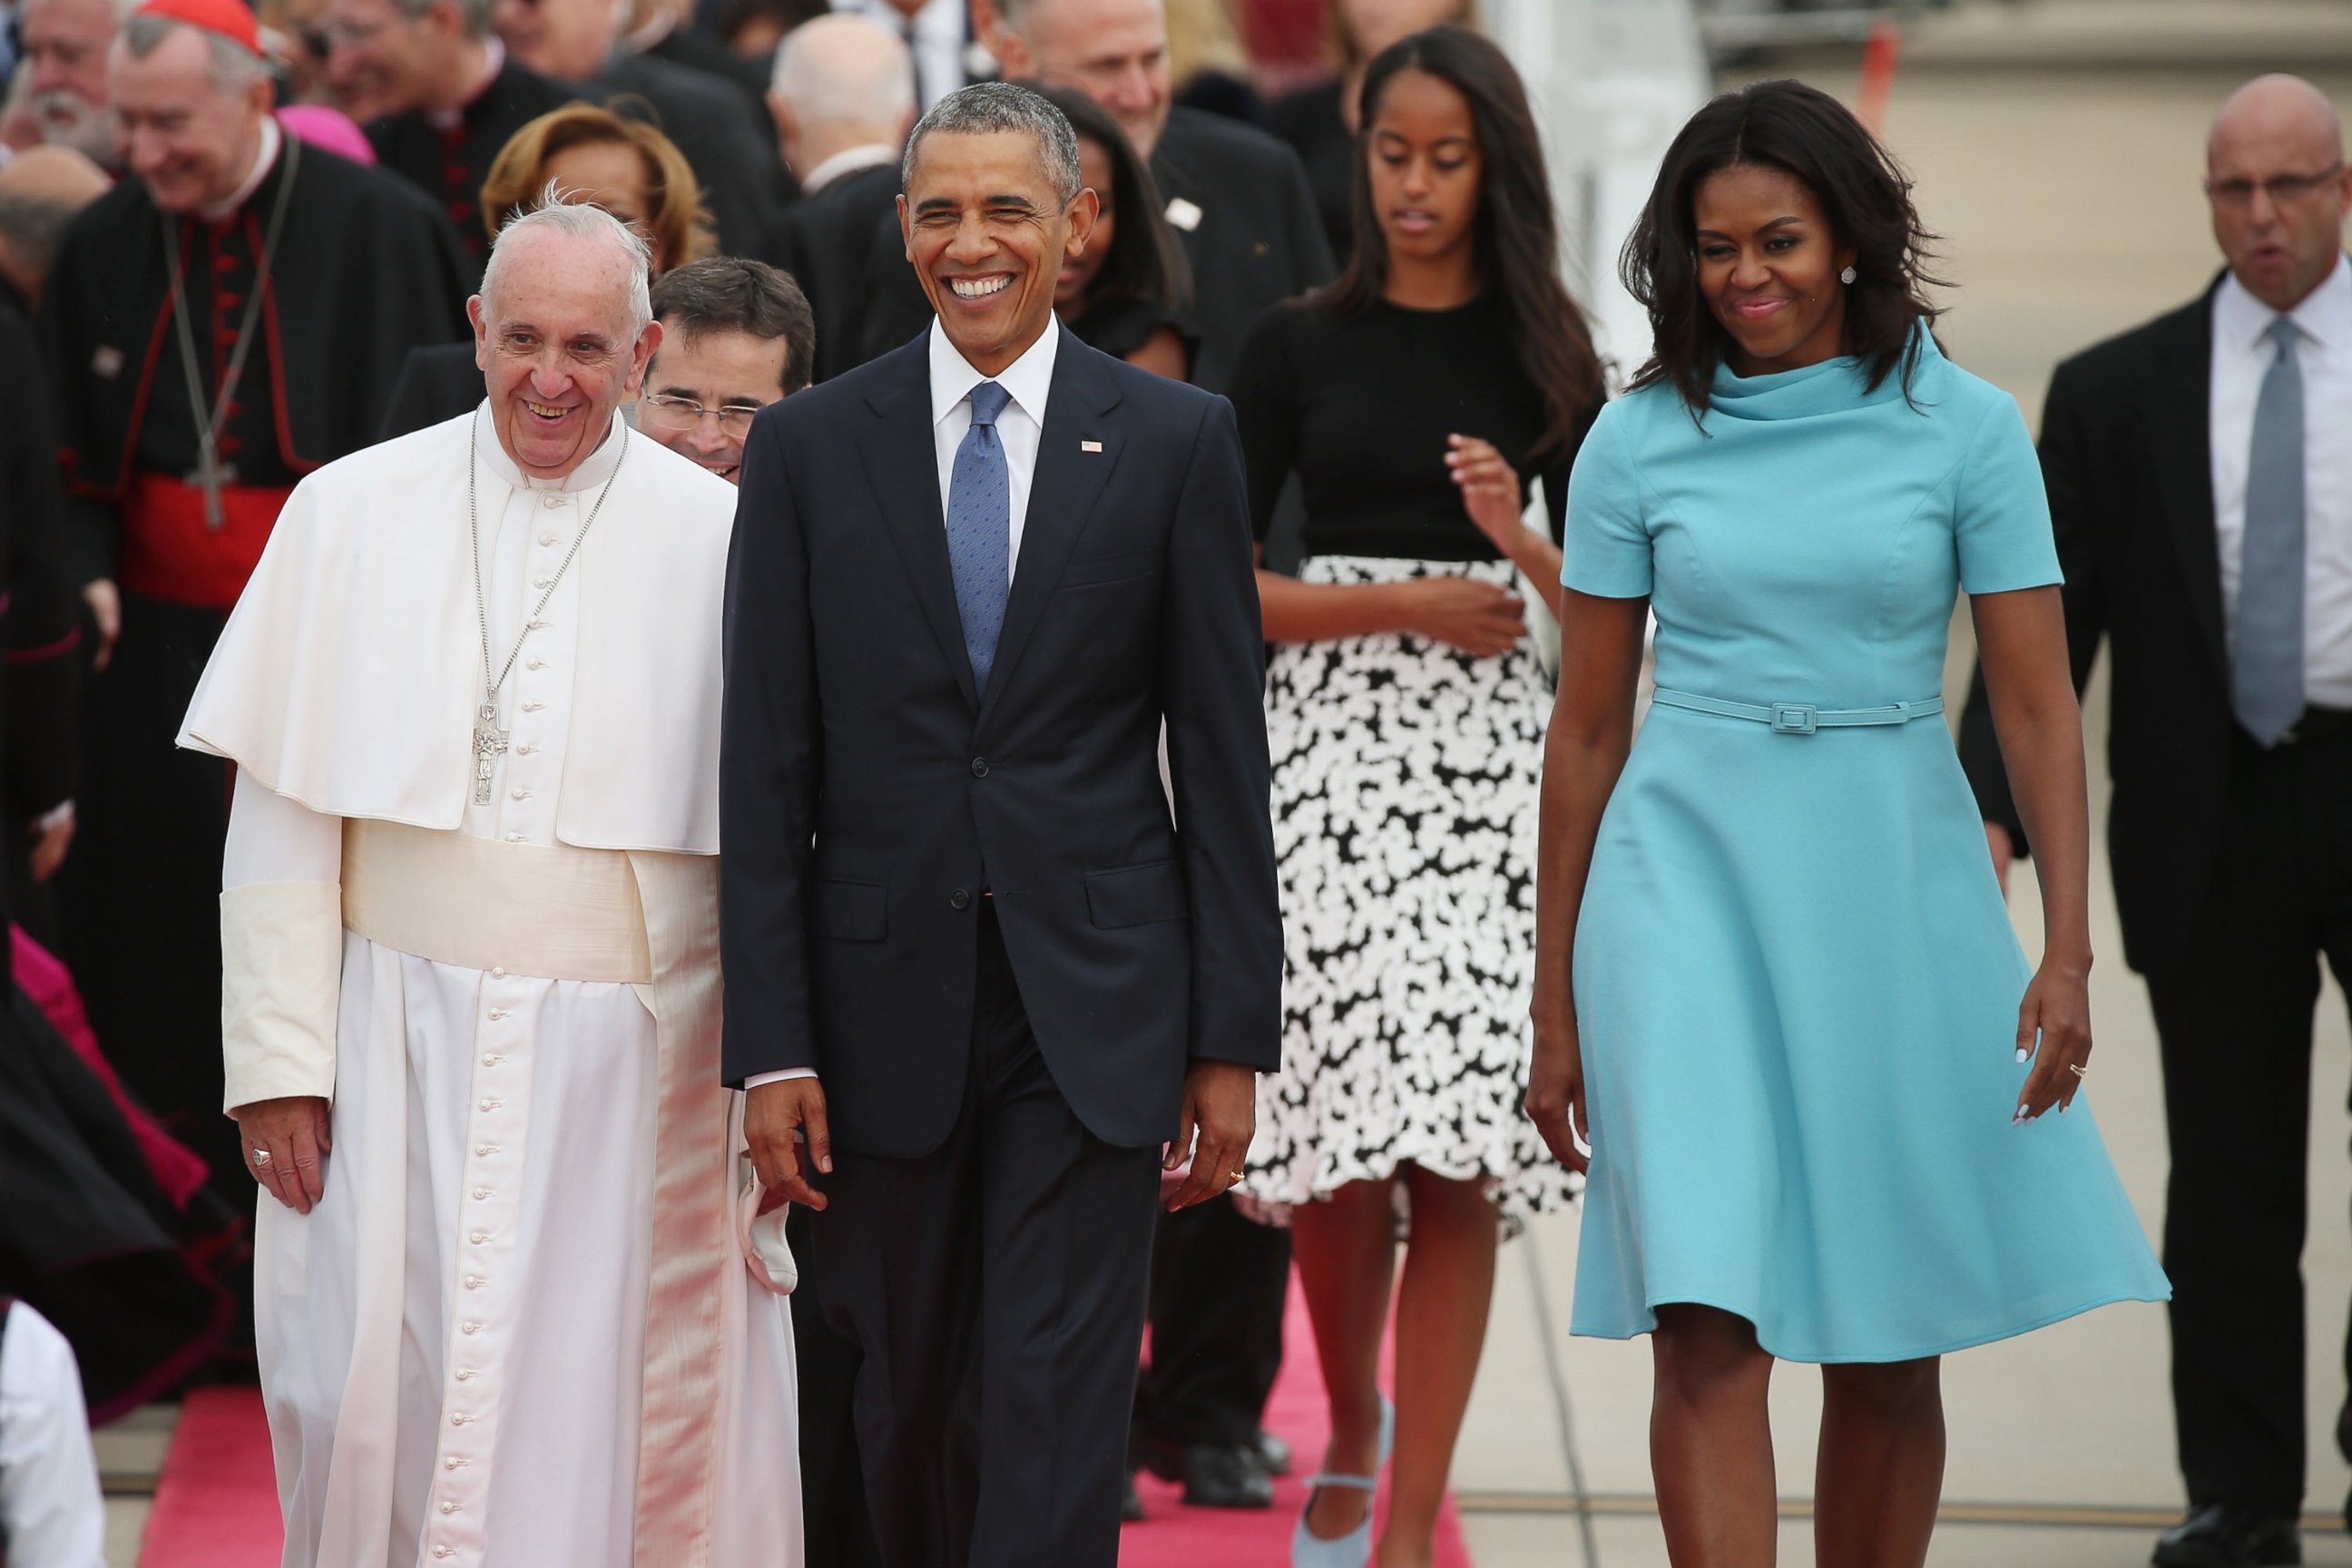 PHOTO: Pope Francis walks with President Barack Obama, Michelle Obama and their daughters after arriving from Cuba, Sept. 22, 2015 at Joint Base Andrews, Md.